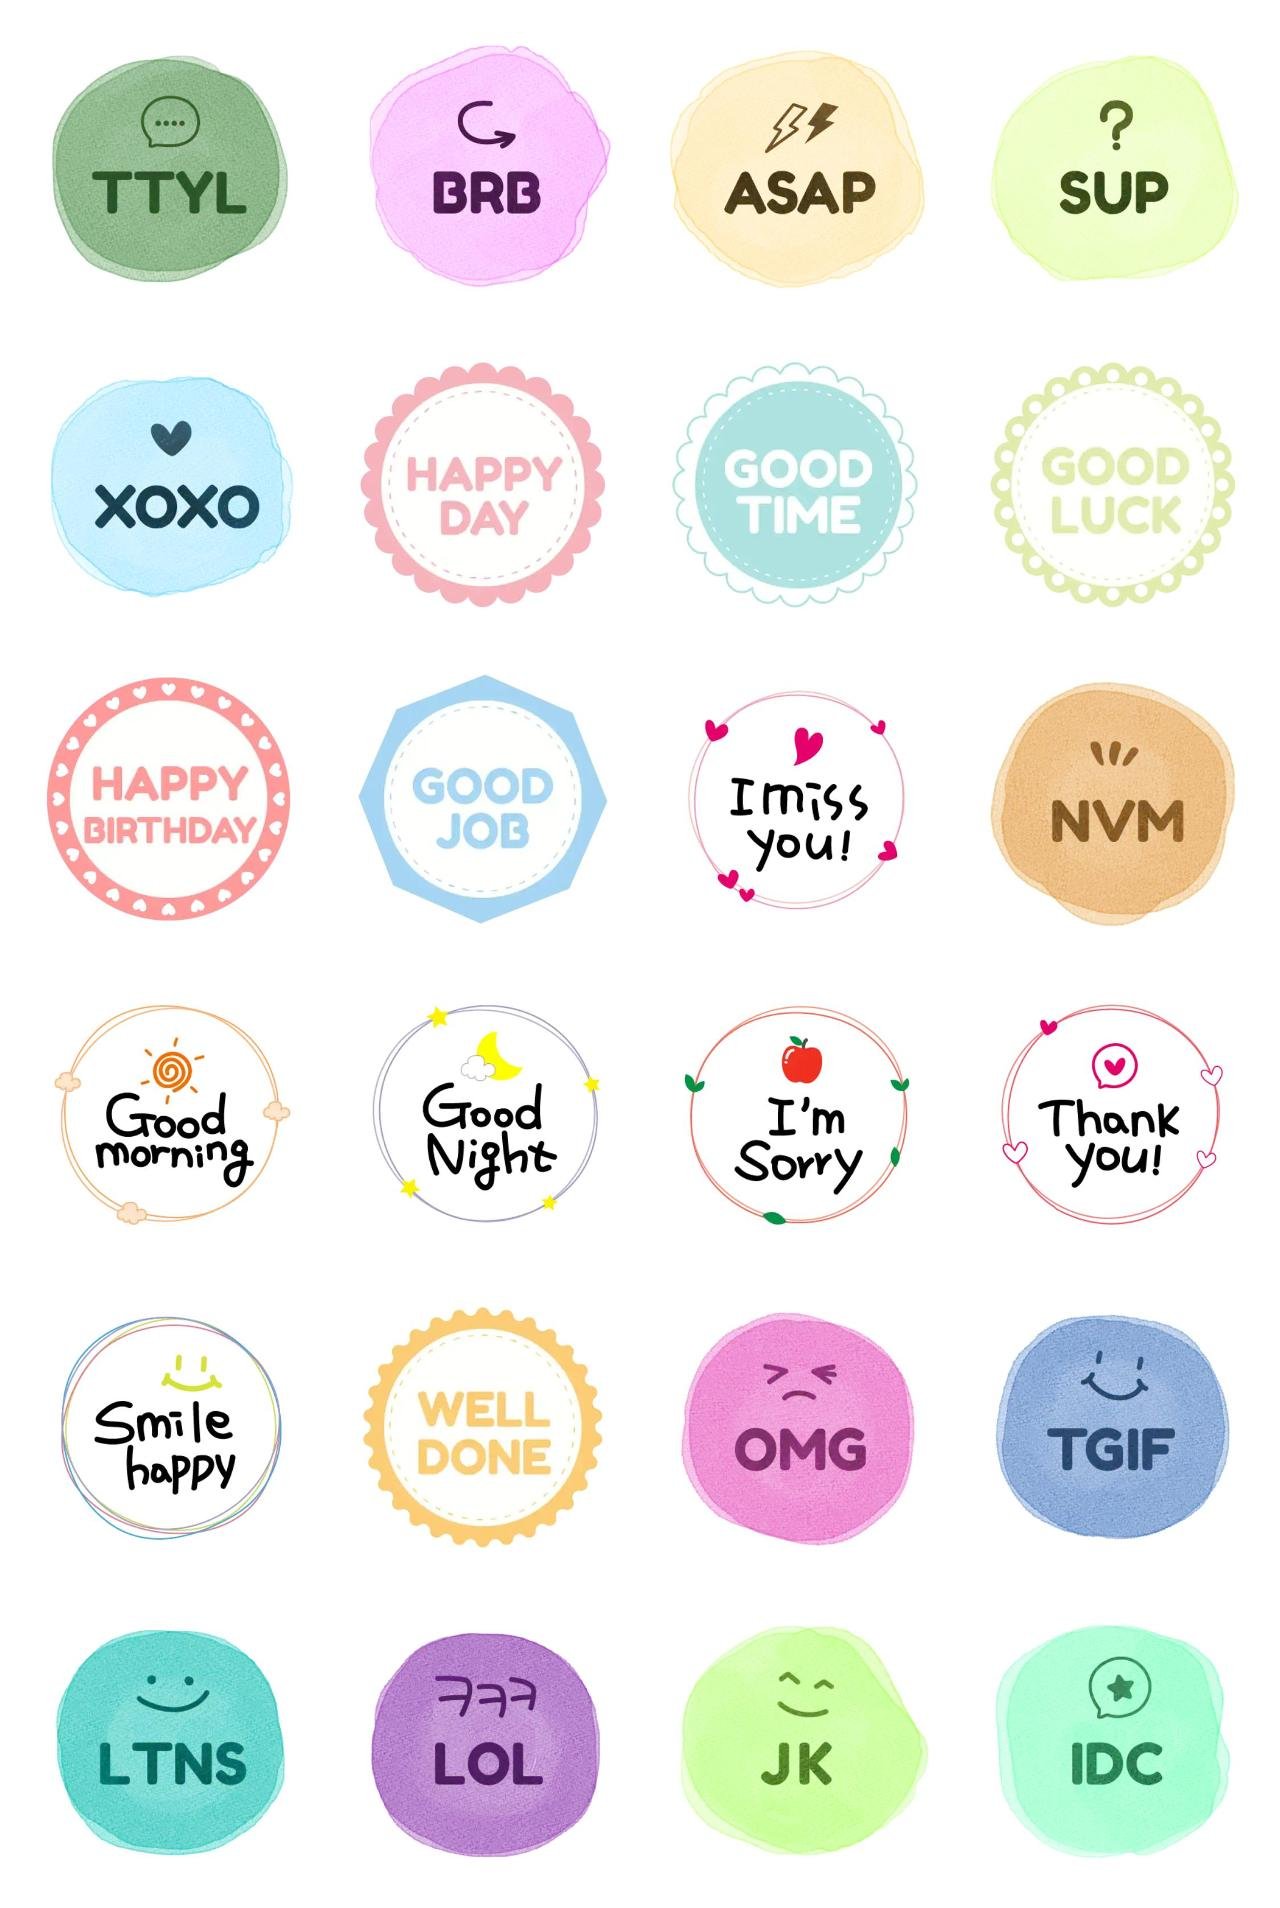 Messages in Circle Phrases,Etc. sticker pack for Whatsapp, Telegram, Signal, and others chatting and message apps